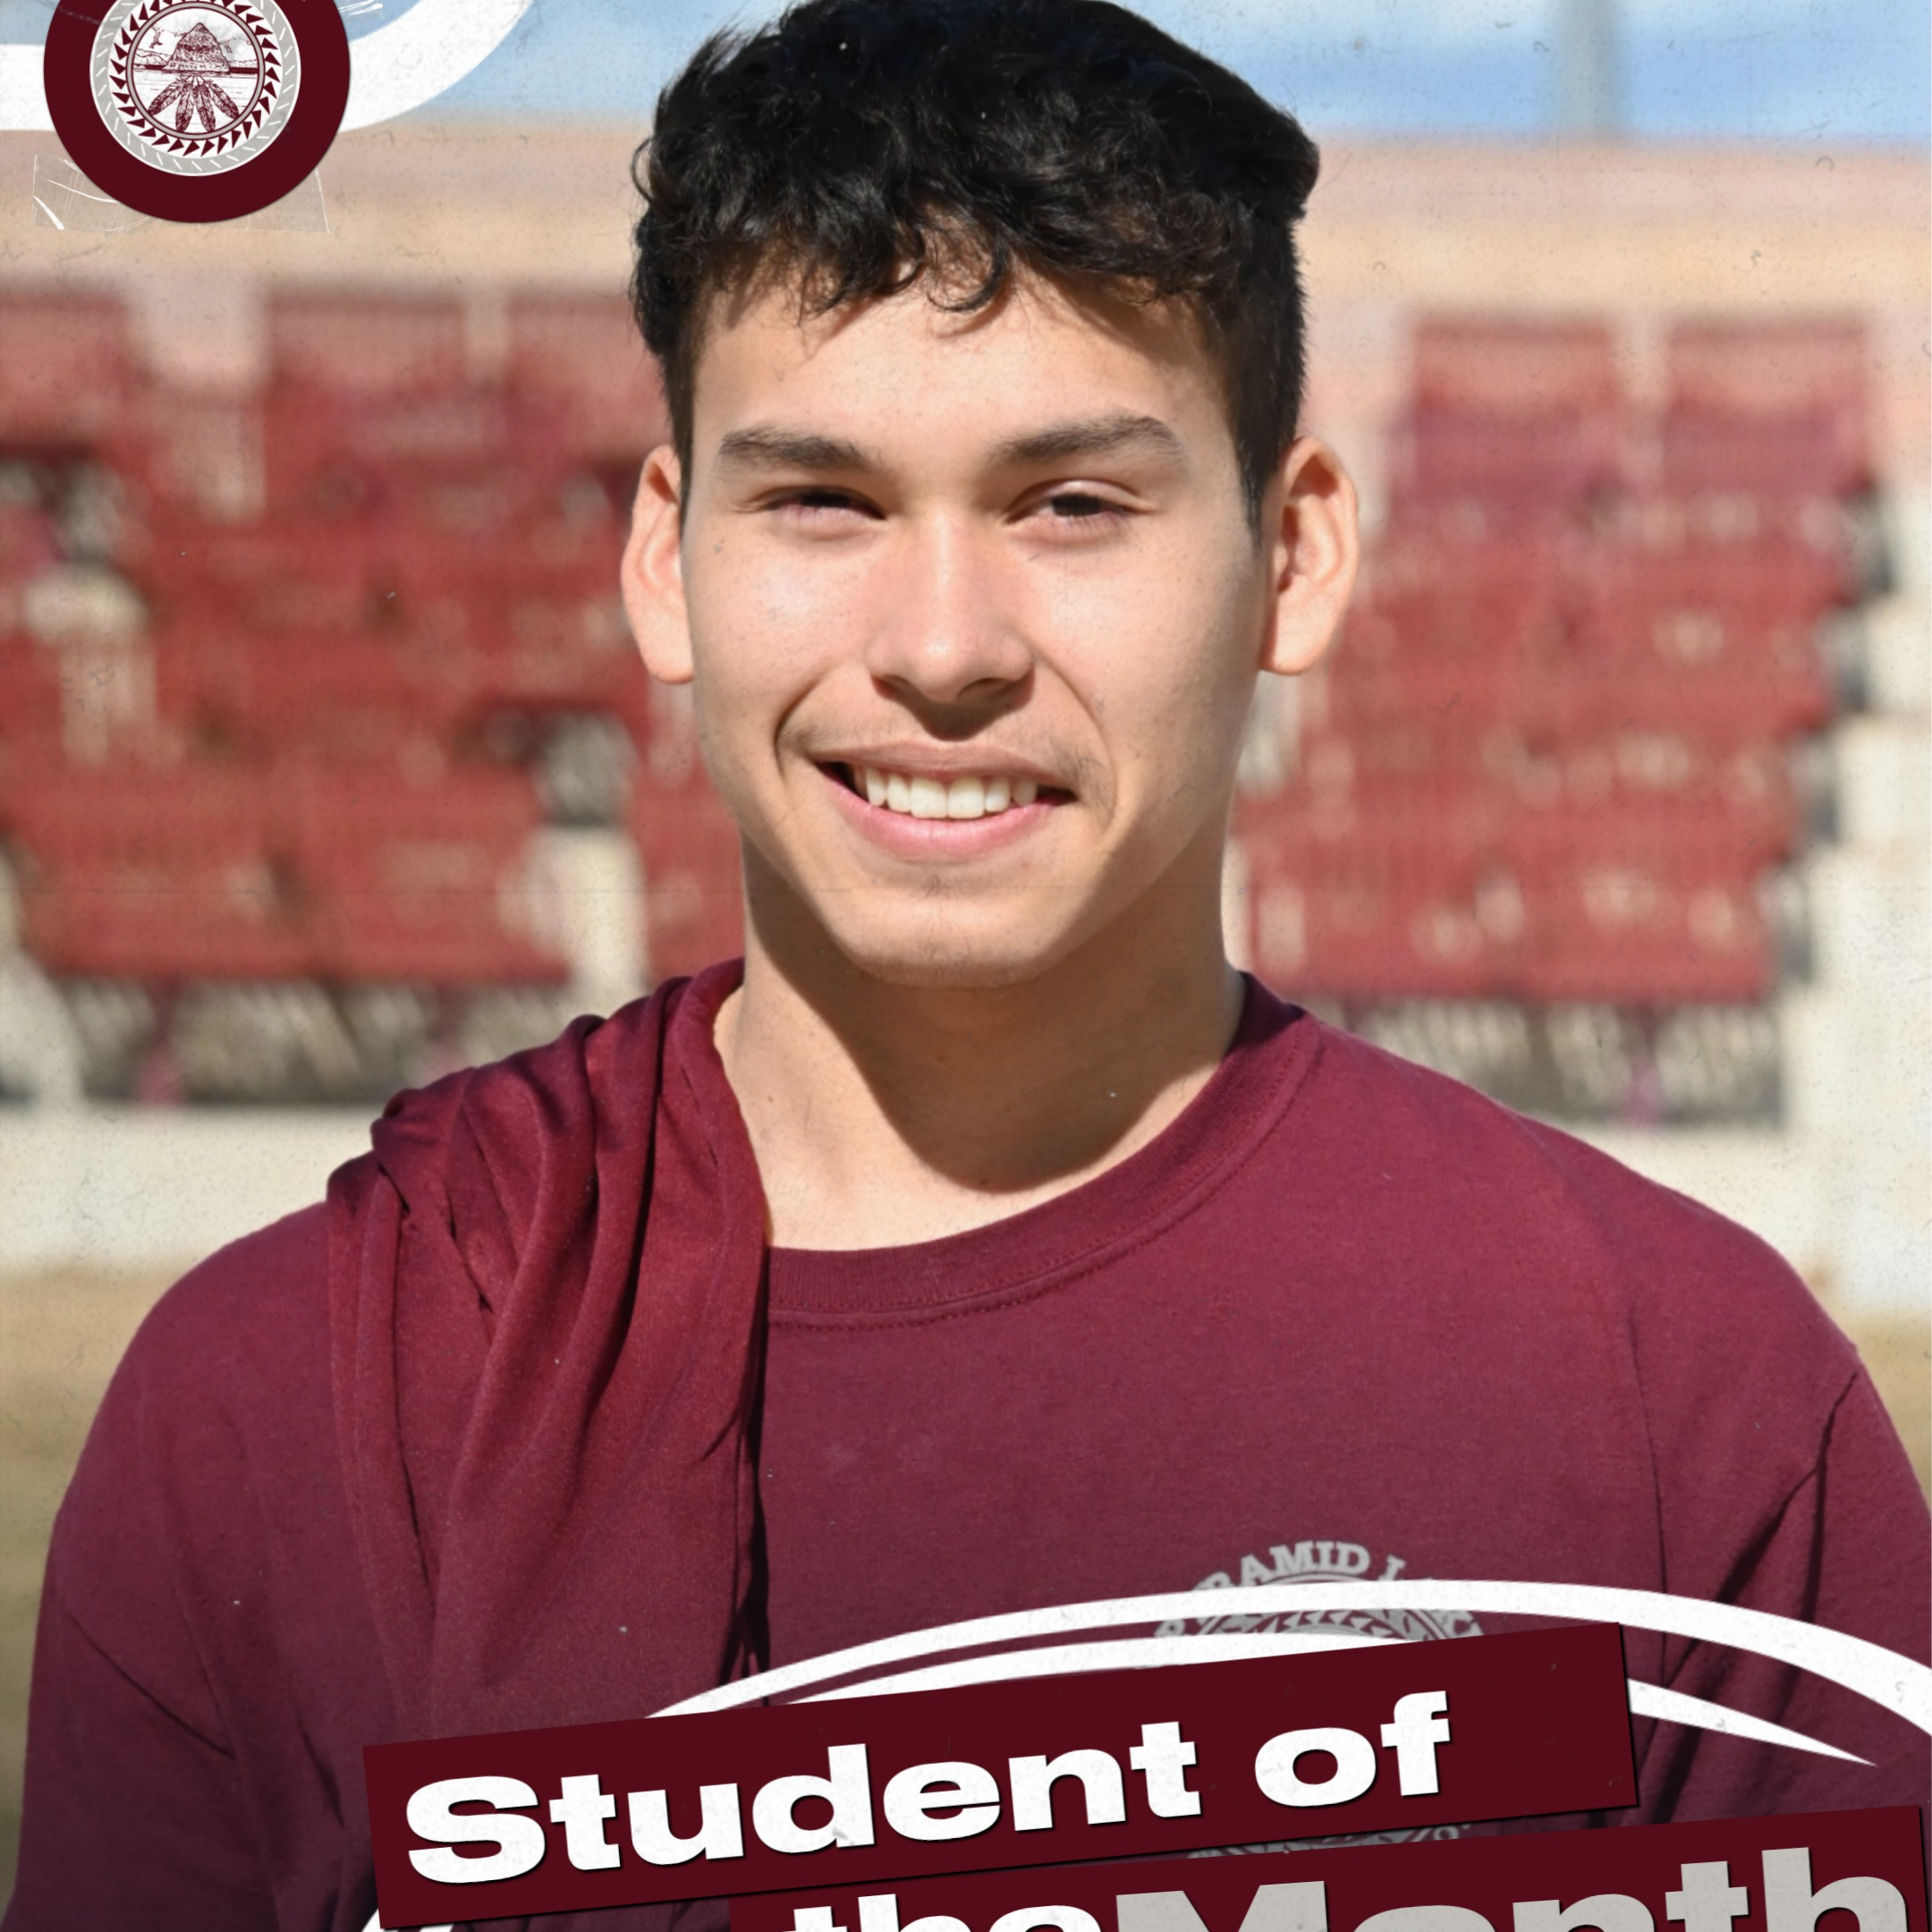 Equis Martinez - student of the month headshot